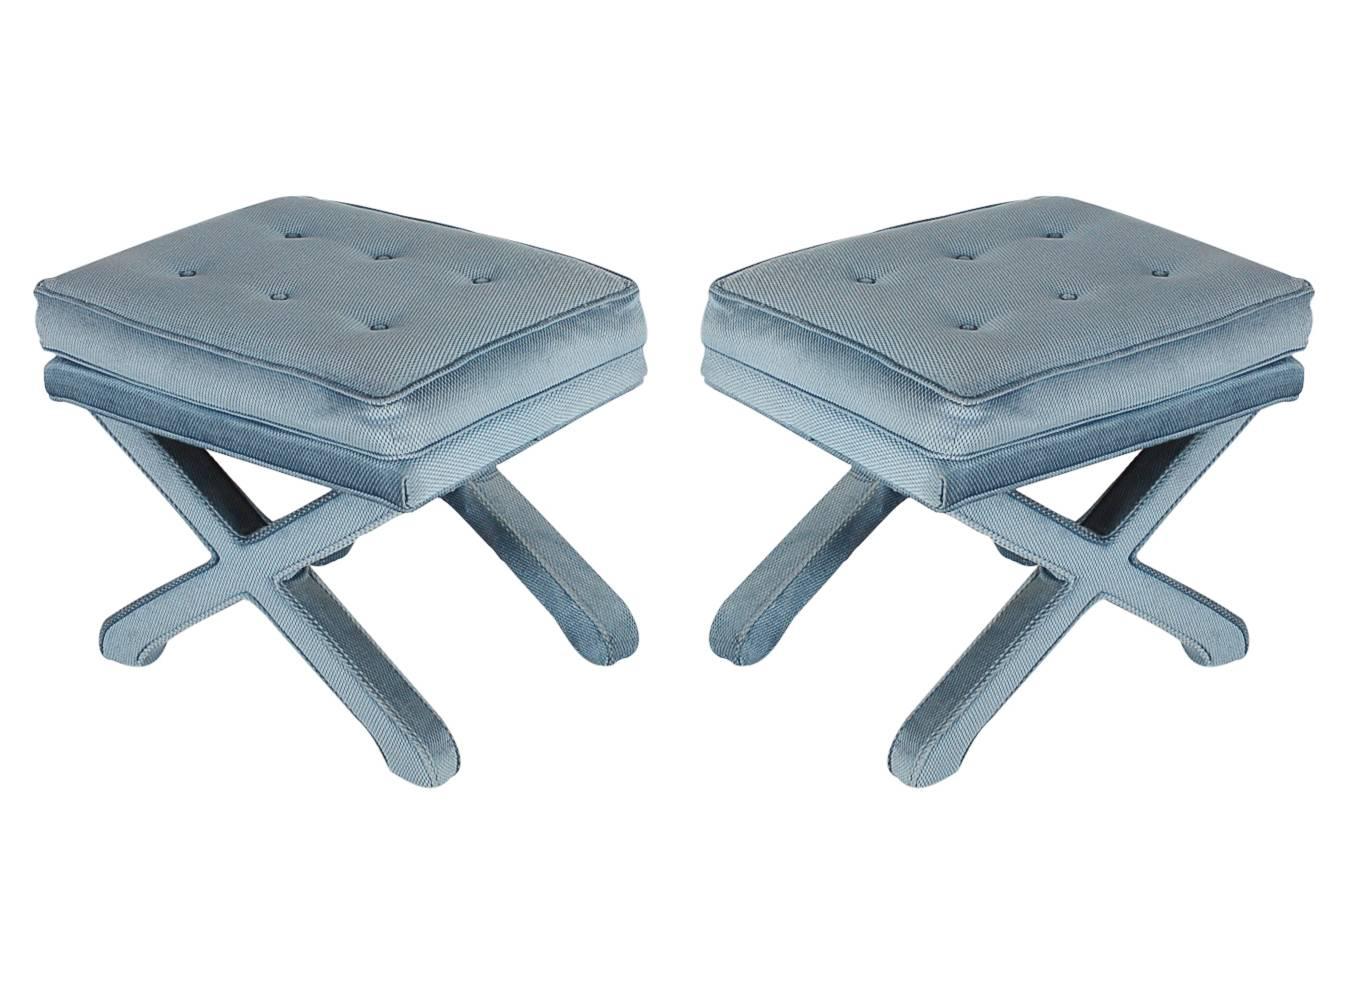 A handsome matching pair of upholstered X-base benches. They feature the original upholstery with button seats. 

In the style of: Billy Baldwin, Billy Haines, Warren Lloyd / Weiman